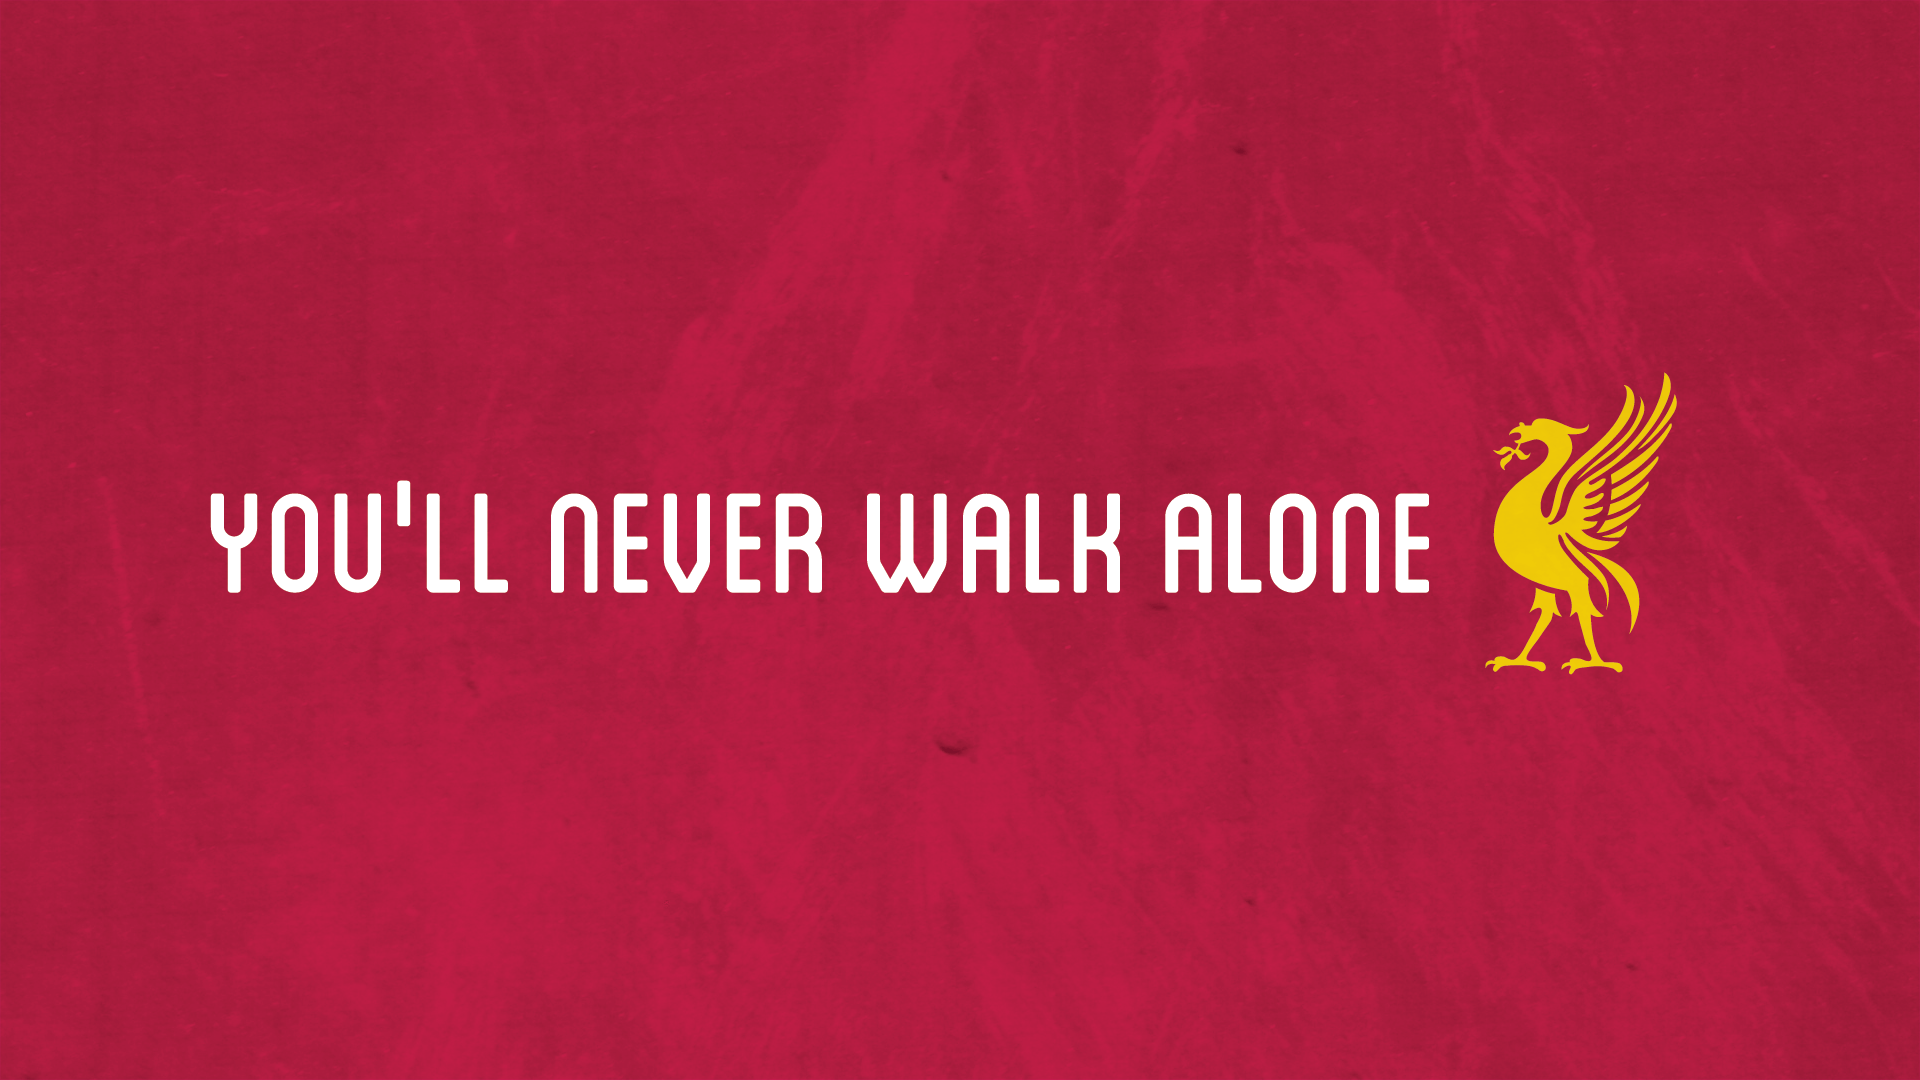 You Ll Never Walk Alone Wallpapers Top Free You Ll Never Walk Alone Backgrounds Wallpaperaccess